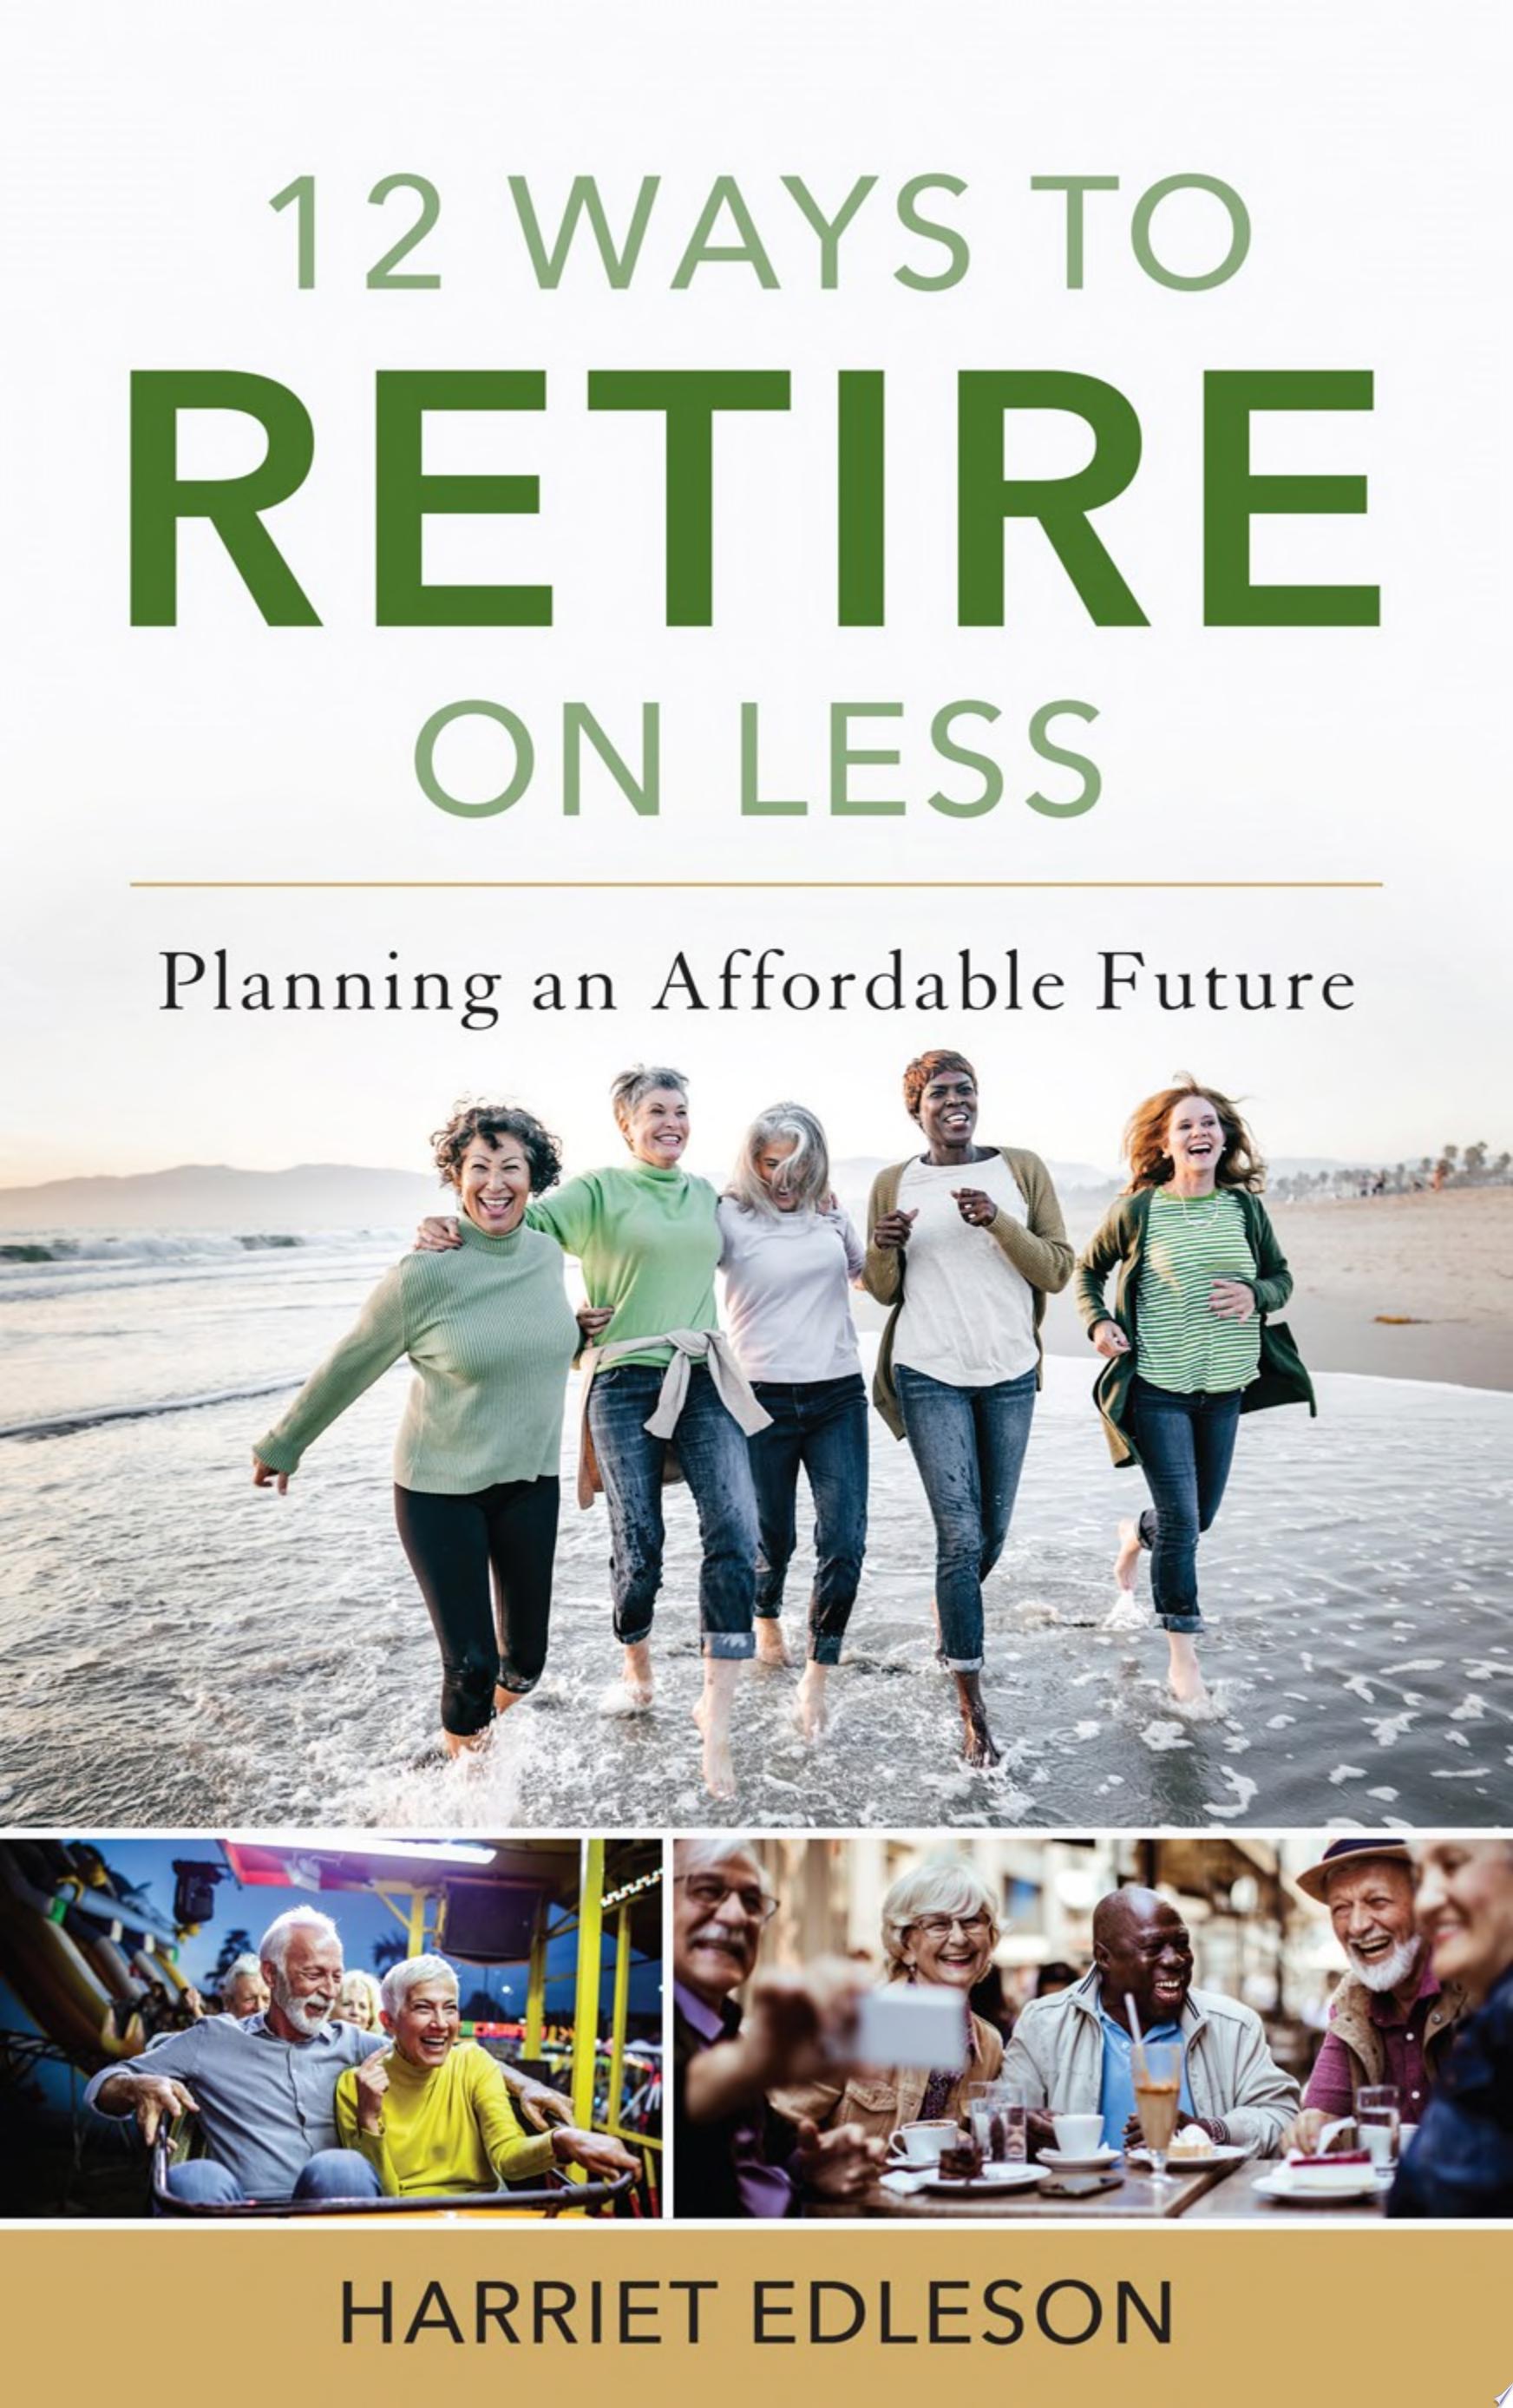 Image for "12 Ways to Retire on Less"